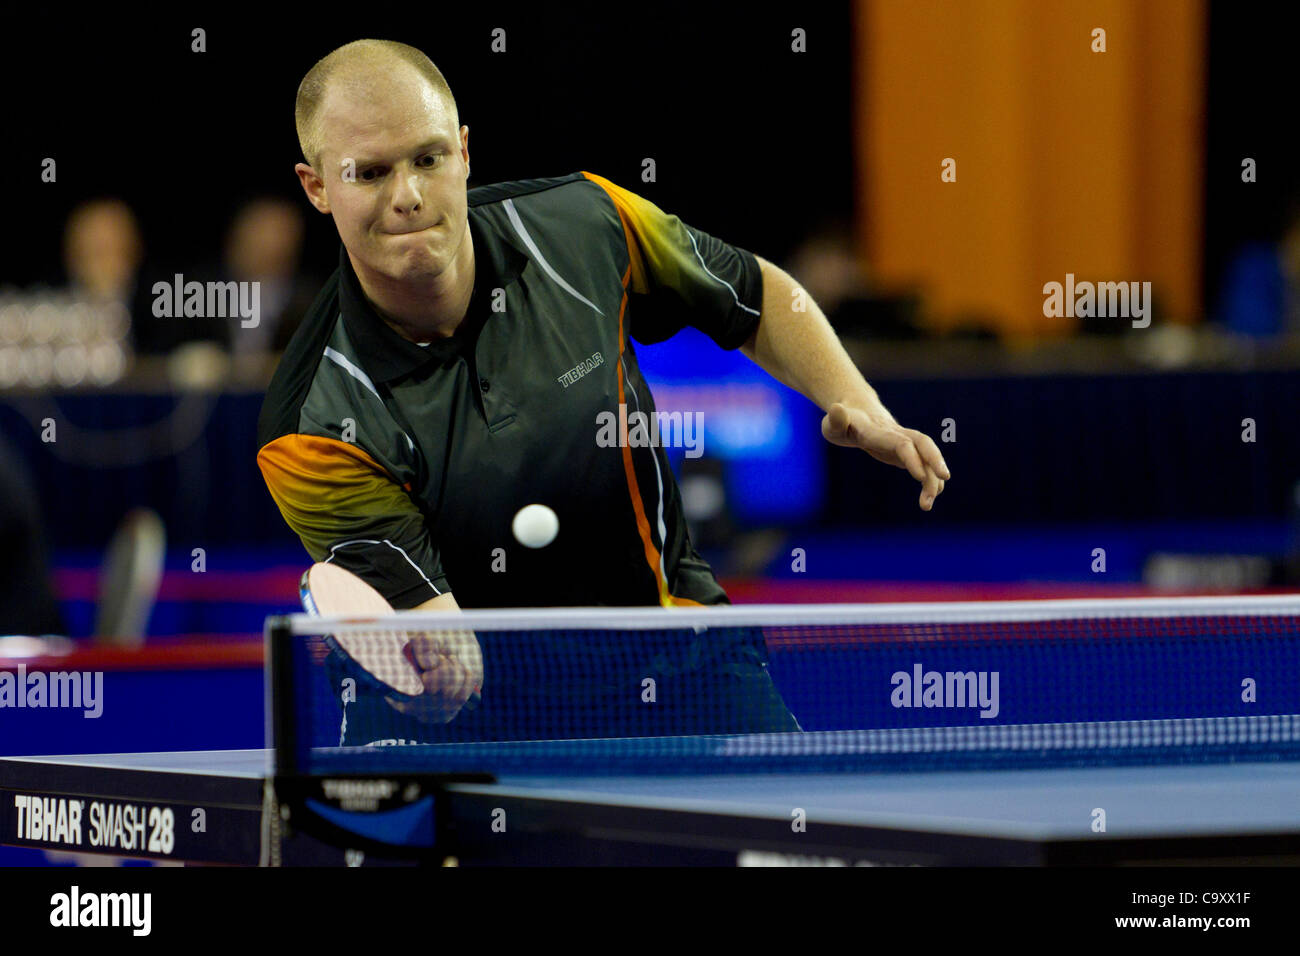 EINDHOVEN, THE NETHERLANDS, 03/03/2012. Table tennis player Barry Weijers (pictured) wins his match against Gerard Bakker at the Dutch table tennis championships 2012 in Eindhoven. Stock Photo